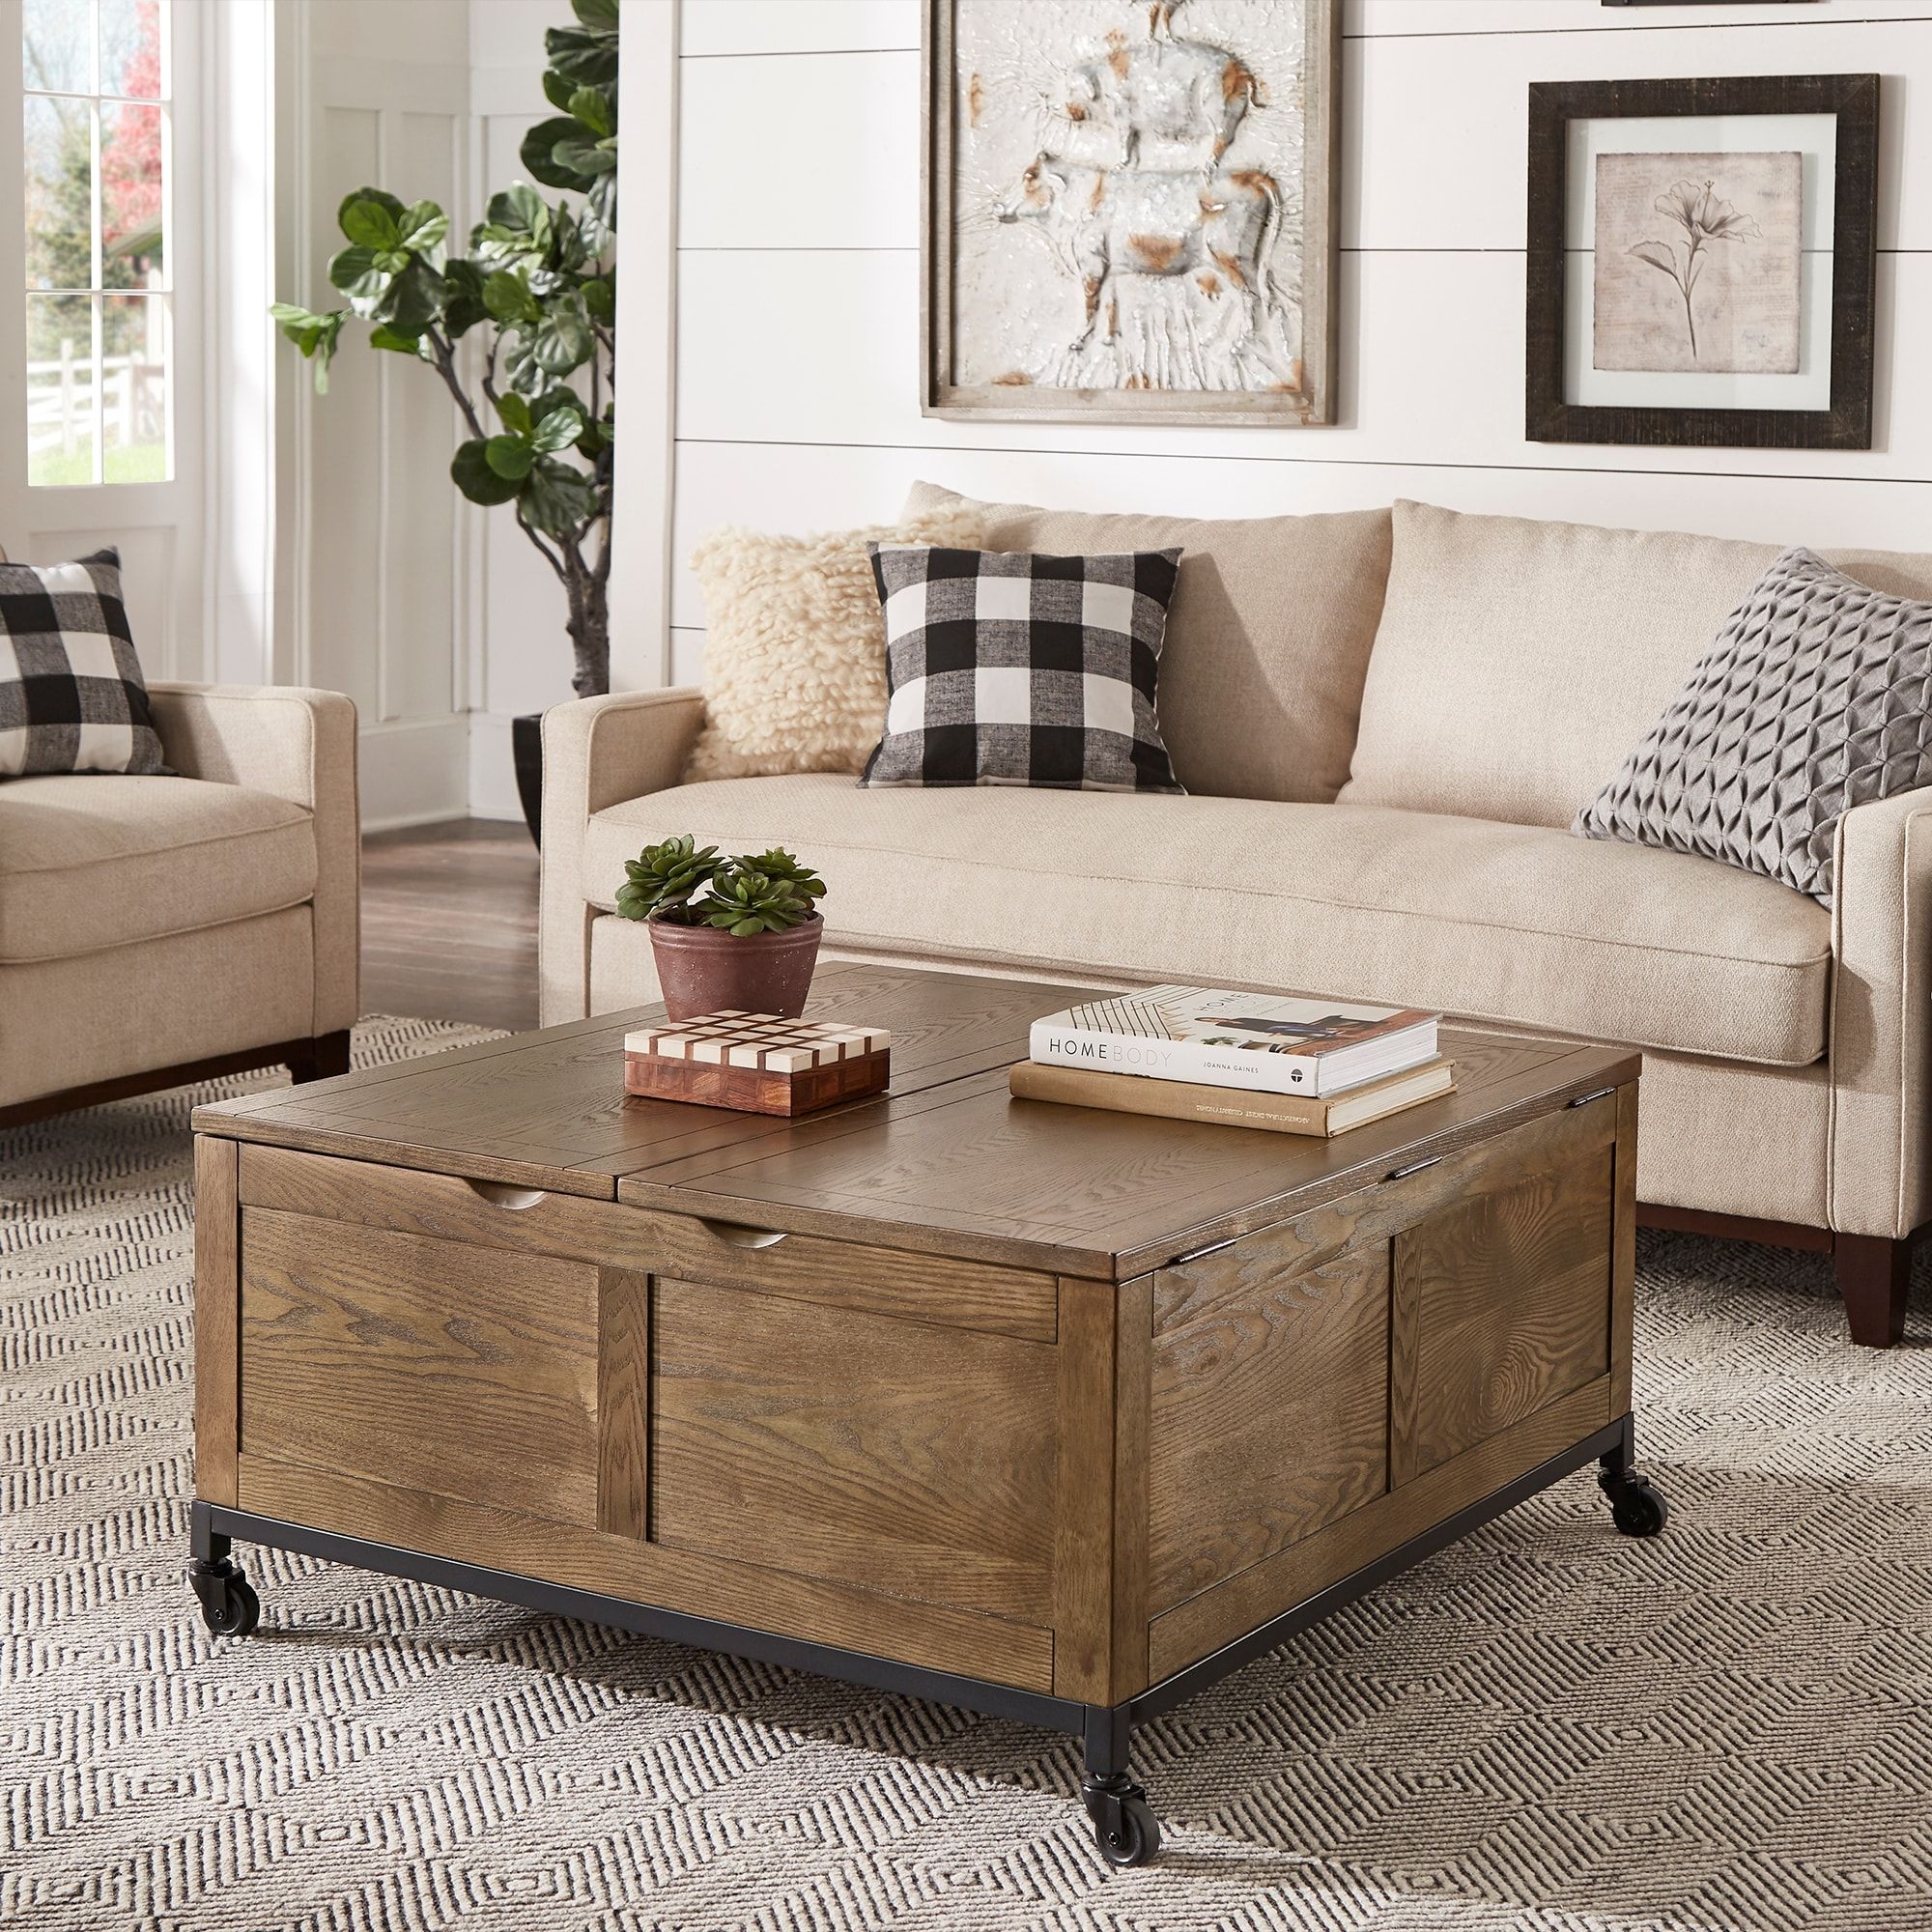 Shay Square Storage Trunk Coffee Table With Caster Wheelsinspire Q  Artisan – On Sale – Bed Bath & Beyond – 22408031 With Coffee Tables With Casters (View 3 of 15)